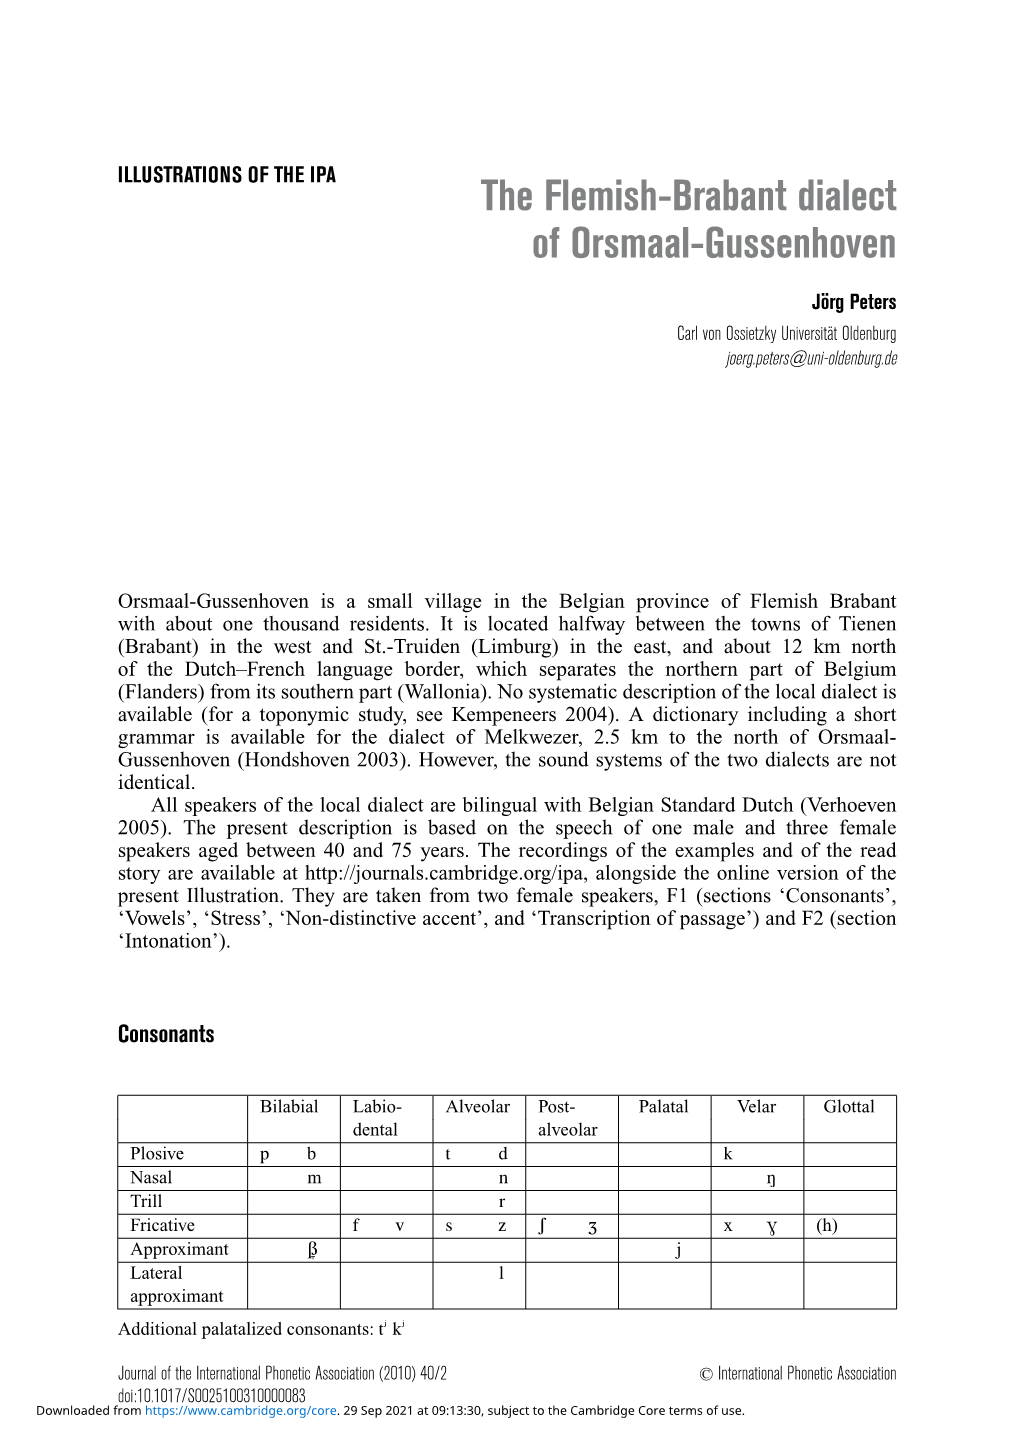 The Flemish-Brabant Dialect of Orsmaal-Gussenhoven